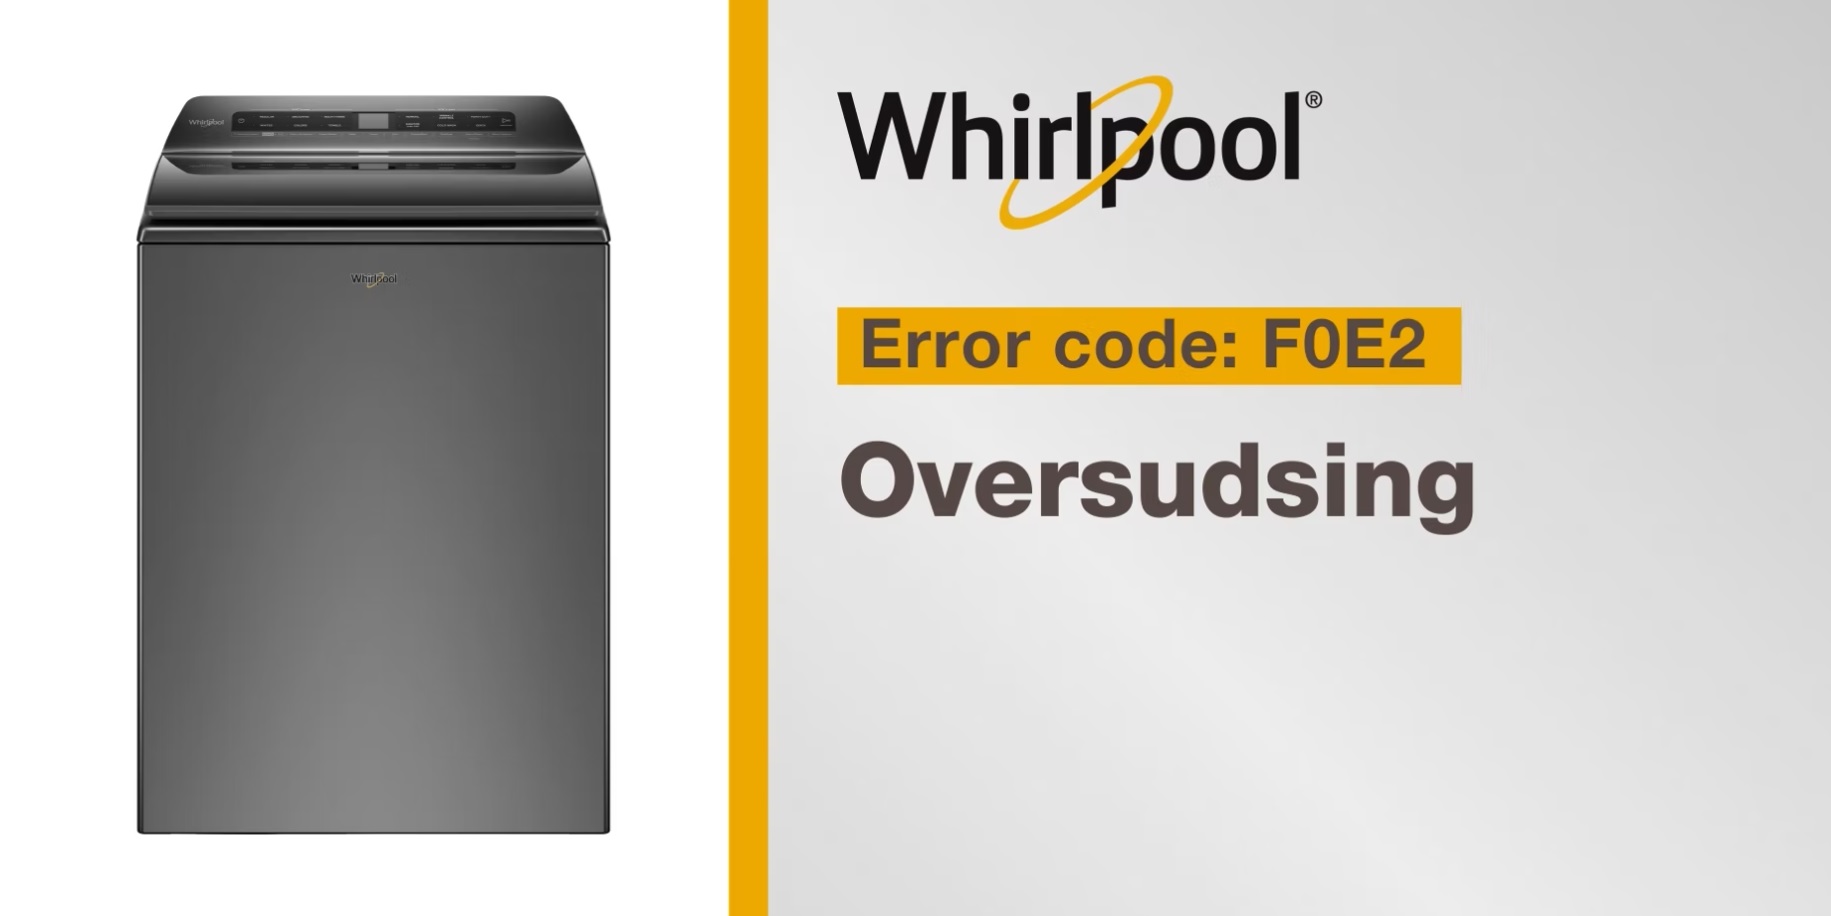 Follow these simple steps to resolve Error Code F0E2 on your Whirlpool Brand® washer. This video will assist you if you are experiencing oversudsing. If you need further assistance call for service at 1-866-333-4591.